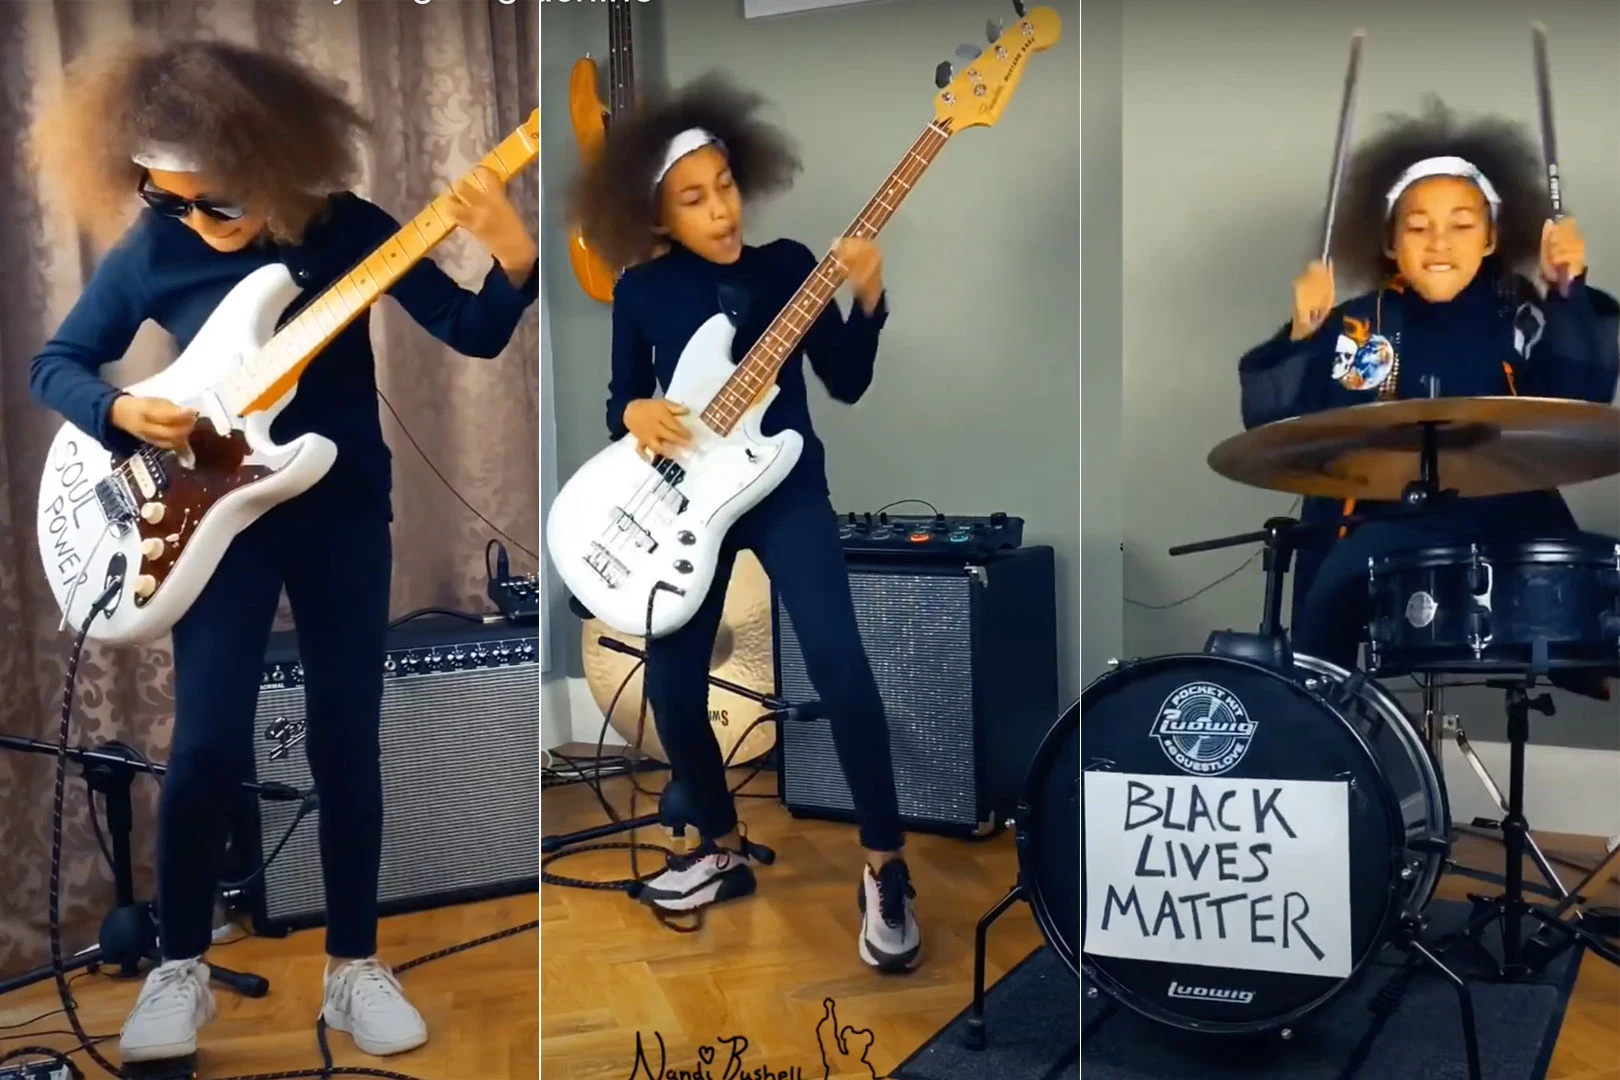 10-Year-Old Girl Rocks Rage Against the Machine for BLM Salute